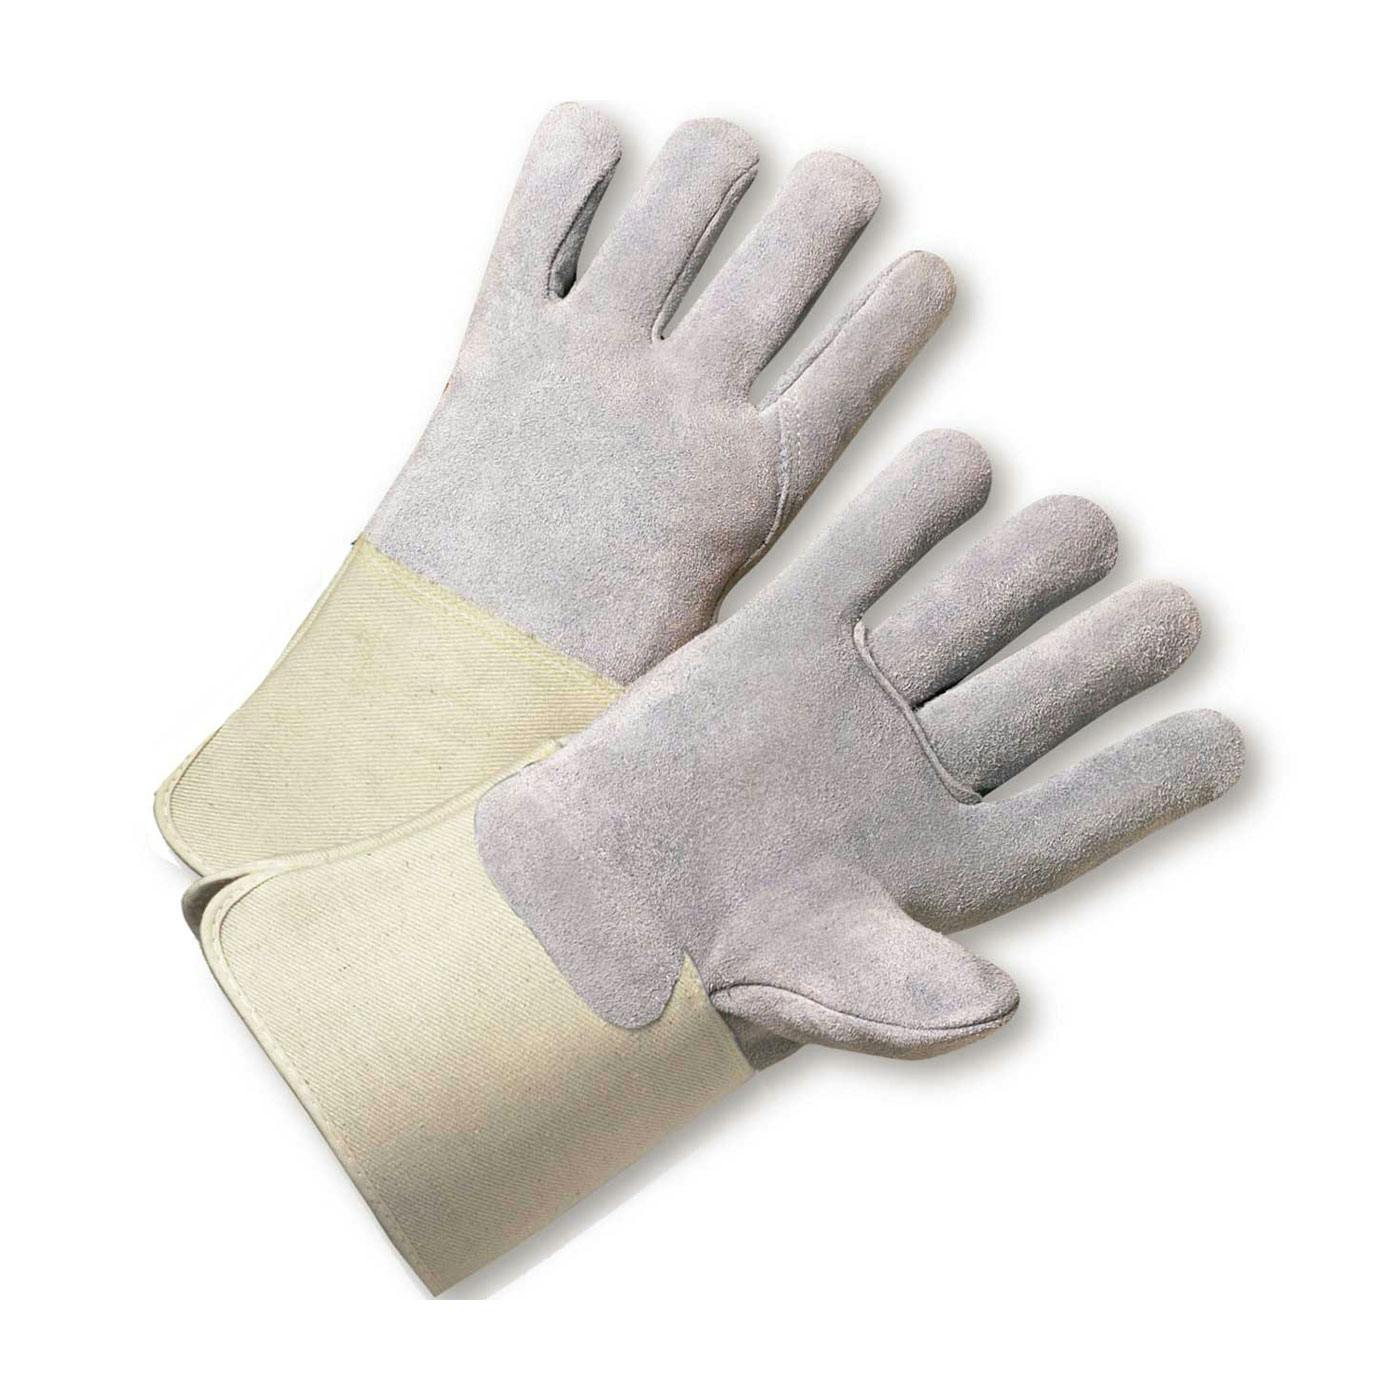 PIP® Superior Grade Split Cowhide Leather Drivers Glove with Aramid Blended Lining - Rubberized Gauntlet Cuff (KS900-EA)